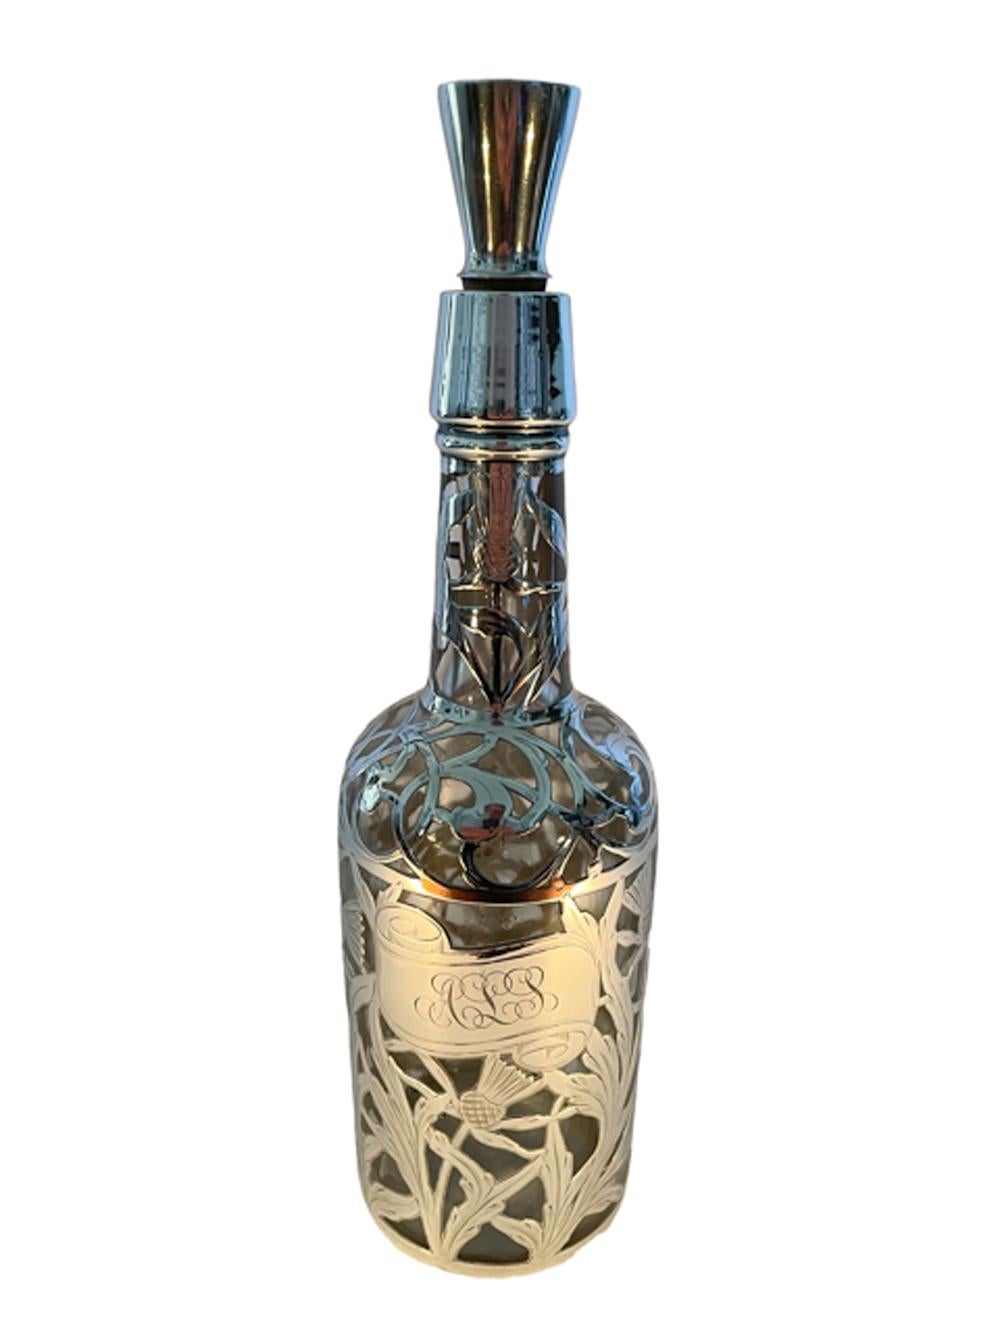 Art Nouveau Silver Overlay Decanter or Back Bar Bottle with Thistle Design  For Sale 6